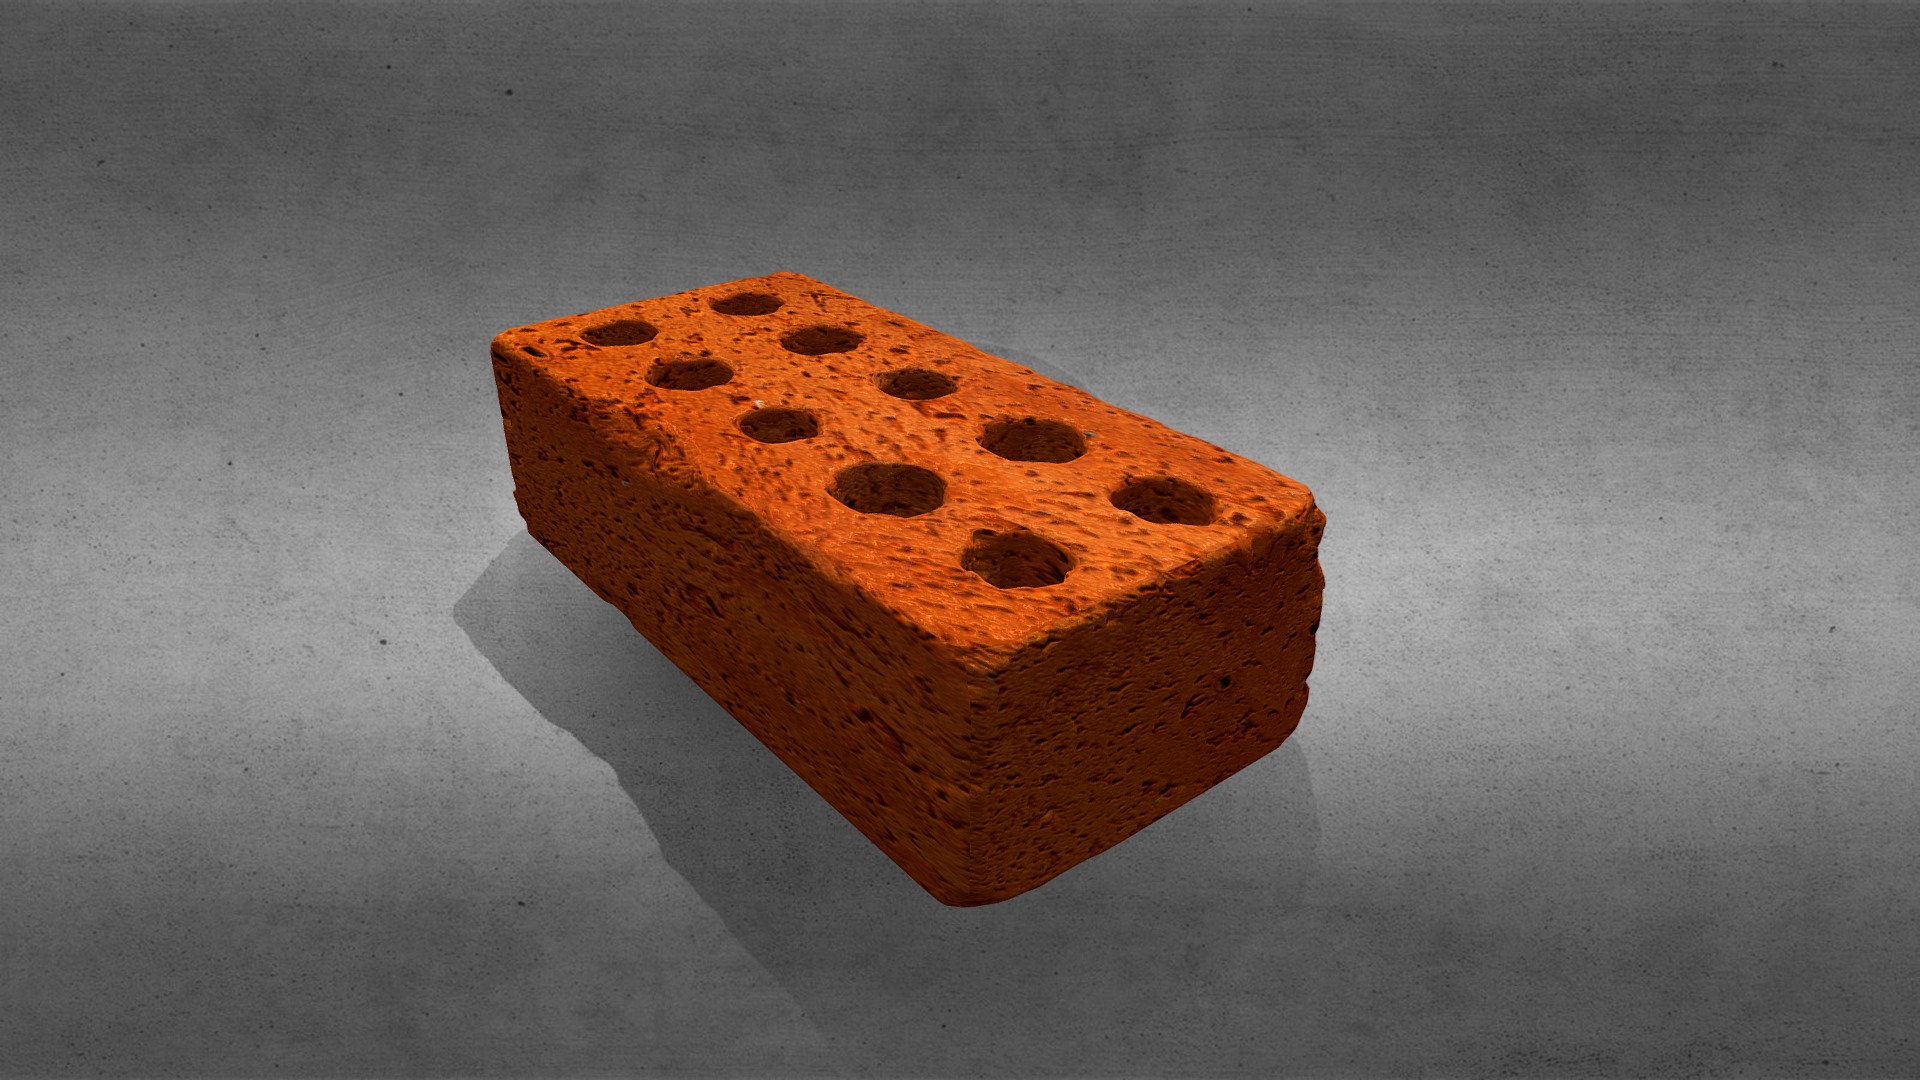 3D model Brick 1 - This is a 3D model of the Brick 1. The 3D model is about a brown and black cookie.